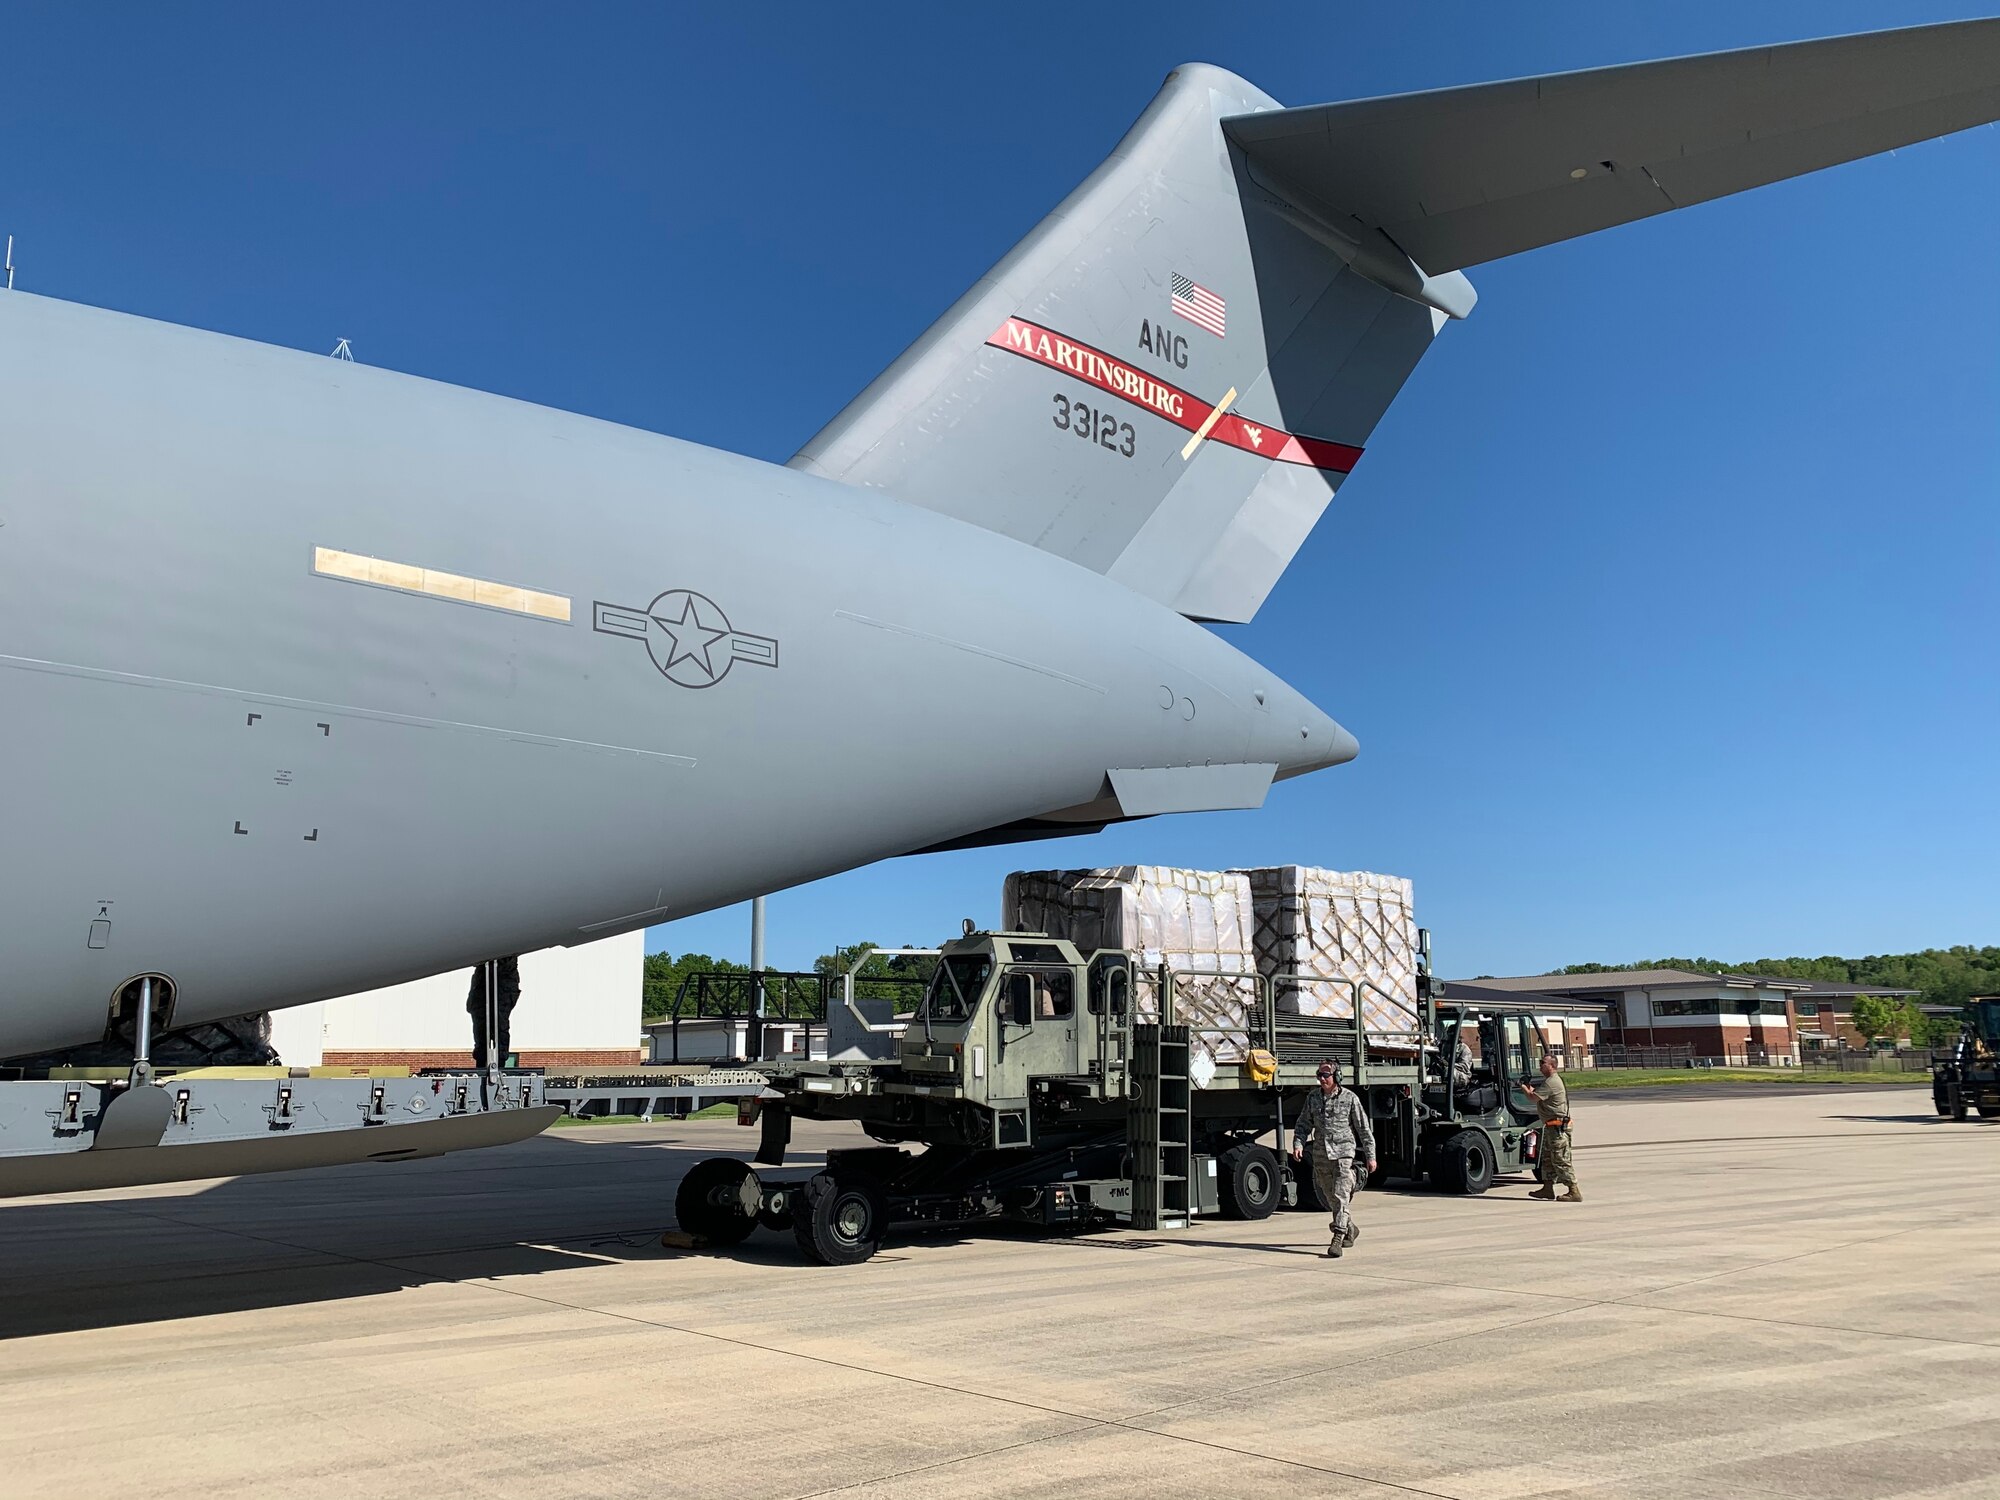 The 167th Airlift Wing transported just over 1 million COVID-19 test kits from Aviano Air Base, Italy, to Memphis, Tenn., April 16, 2020, for distribution throughout the United States. Eighteen pallets filled the cargo compartment of the C-17 Globemaster III aircraft, crewed by seven 167th AW Airmen.